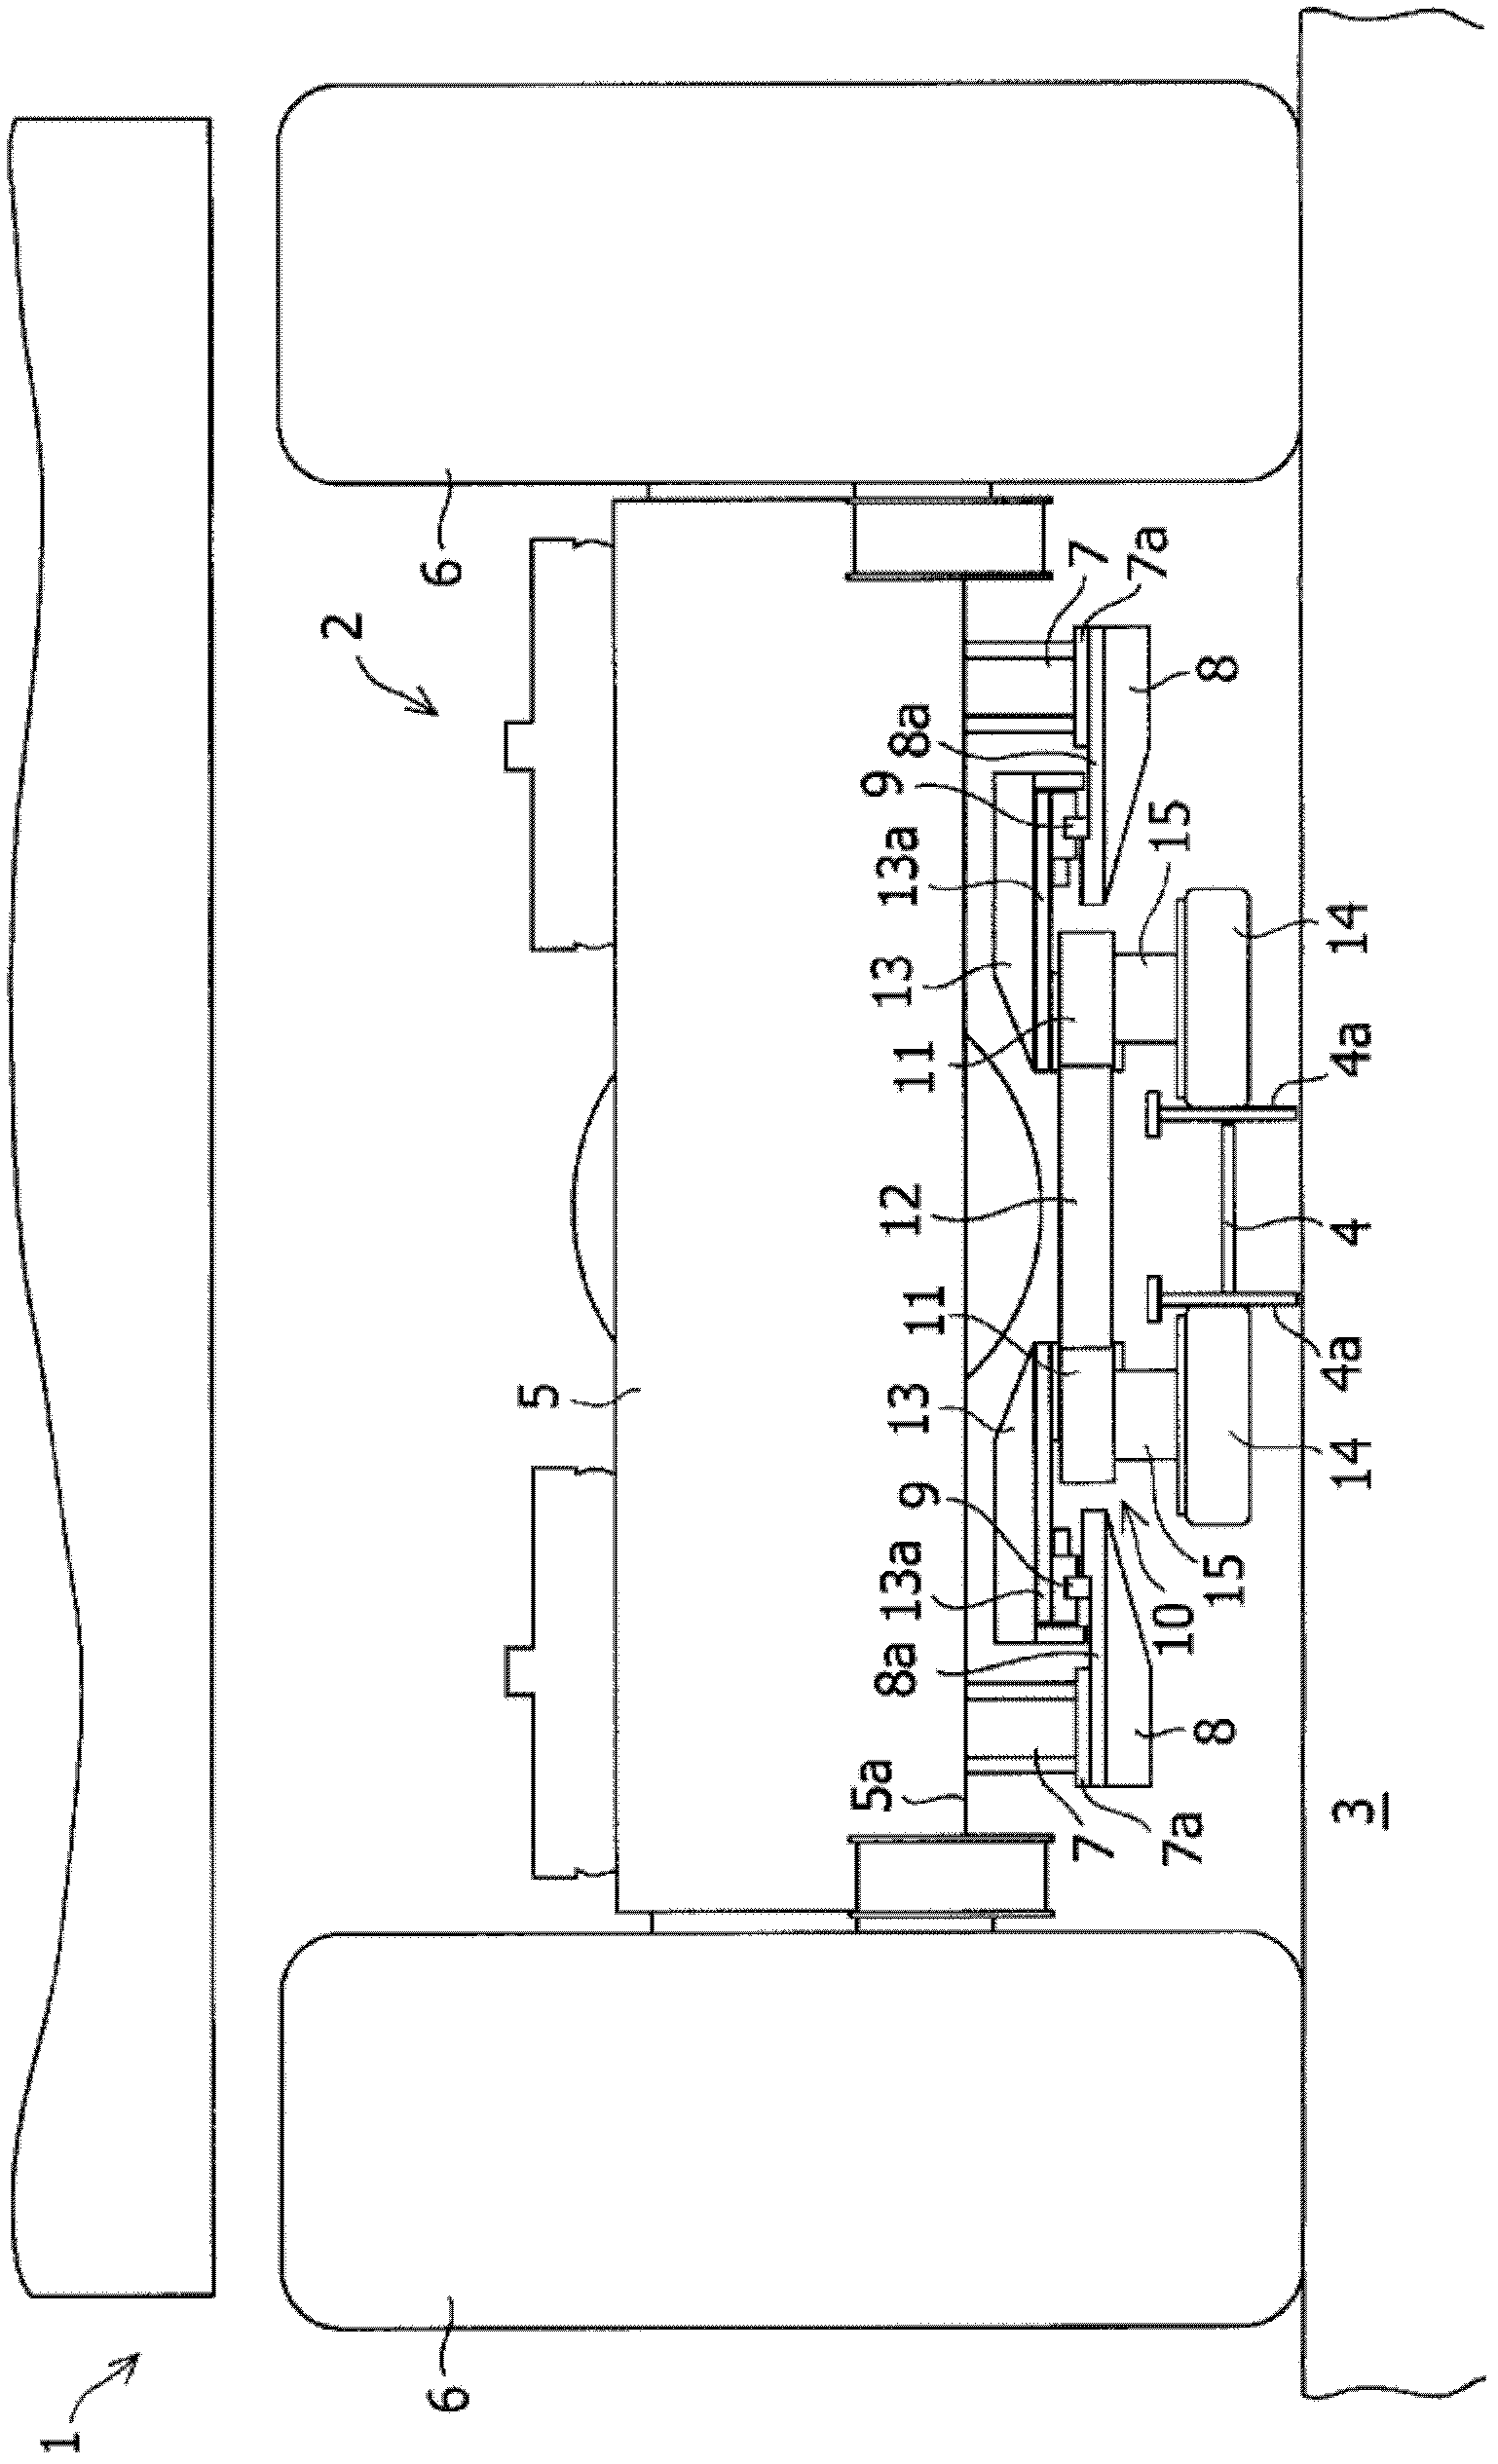 Bogie for track-guided vehicle